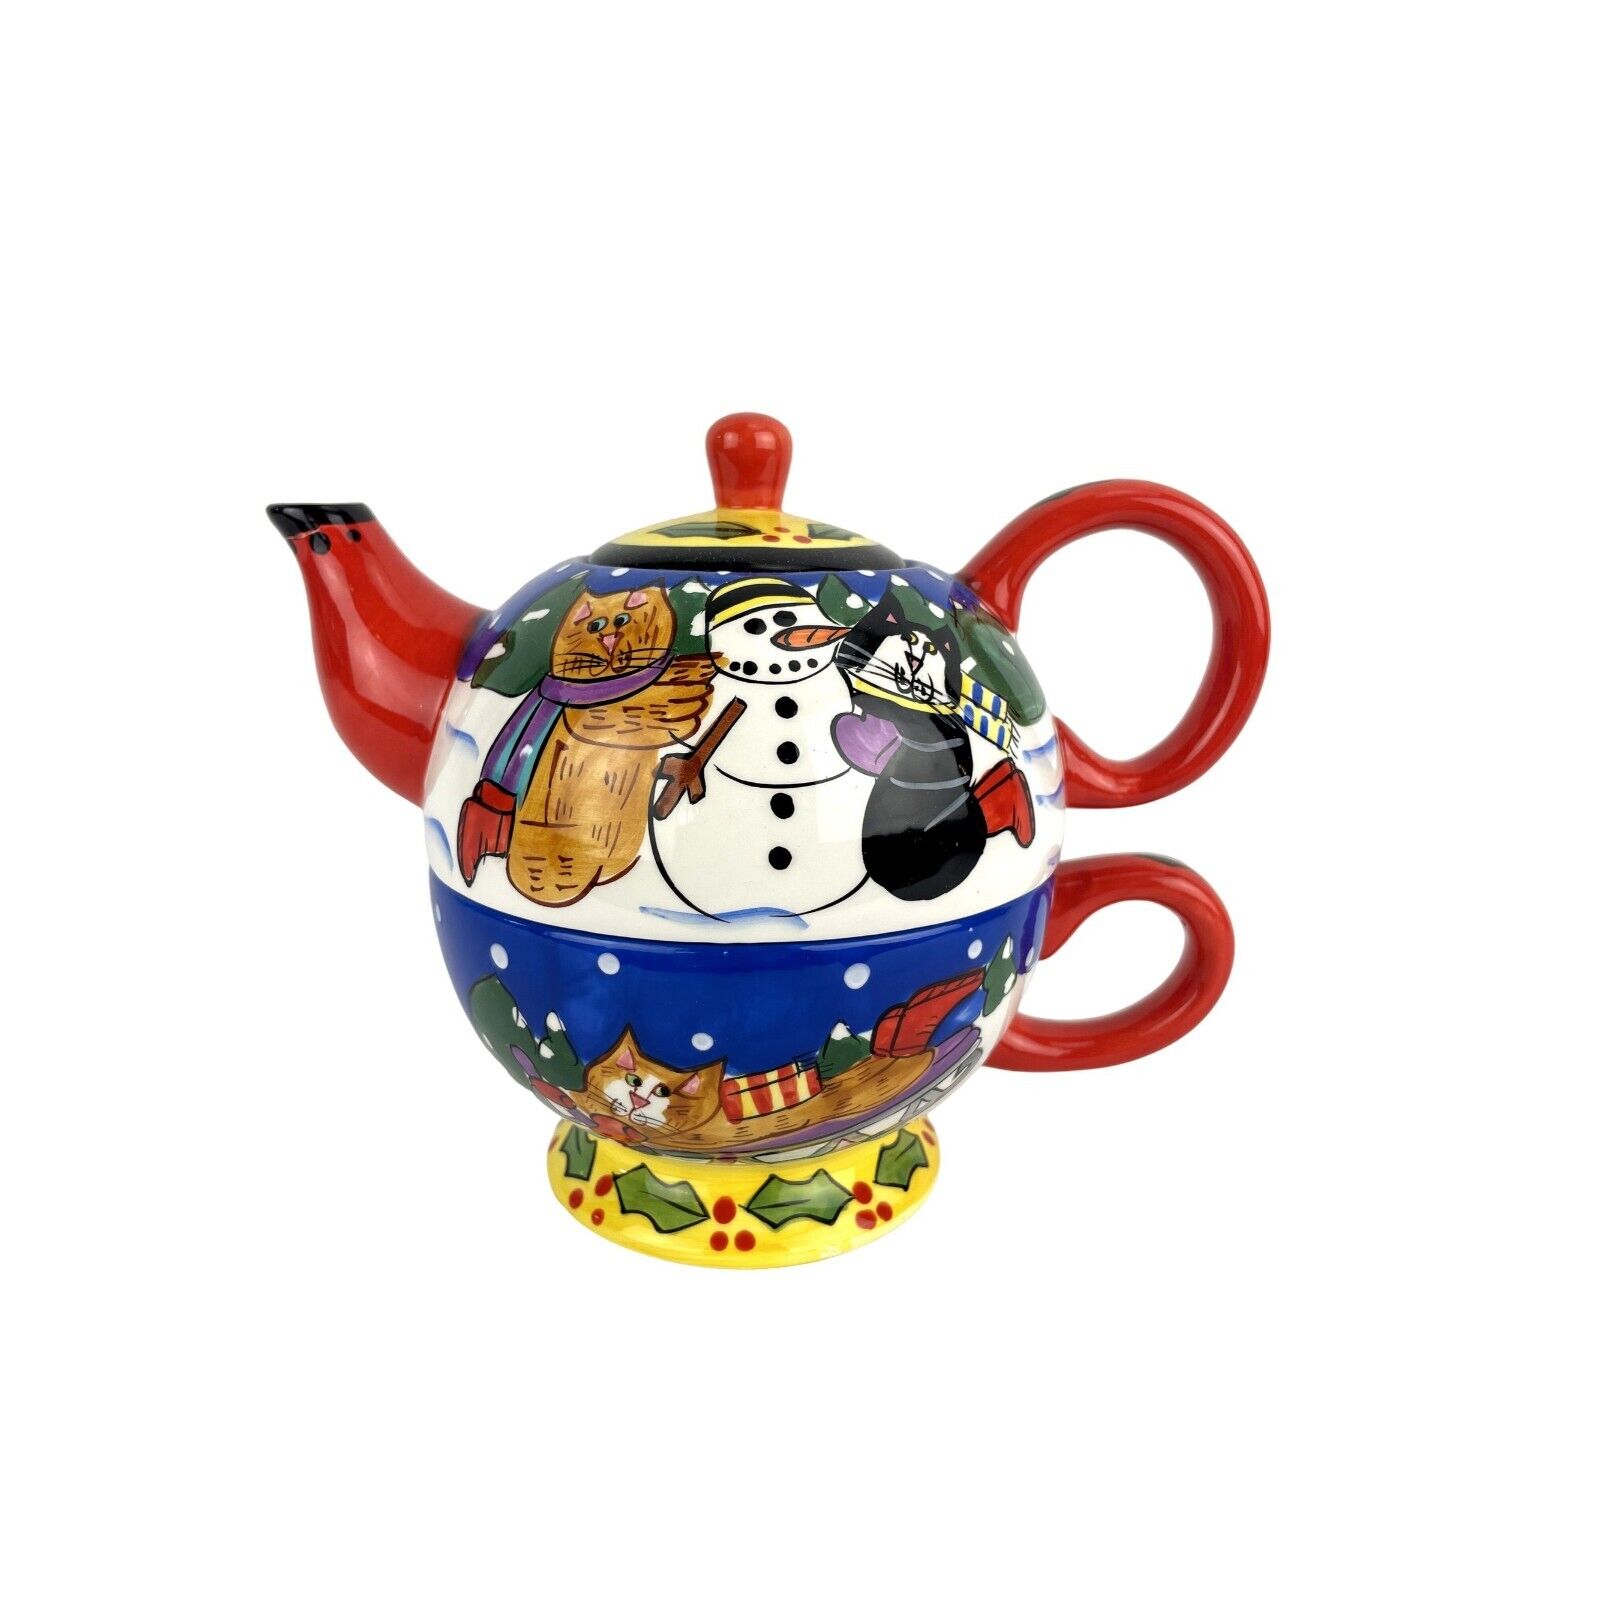 Catzilla Red Ceramic Teapot Christmas Cats Building Snowman Candace Reiter 2001